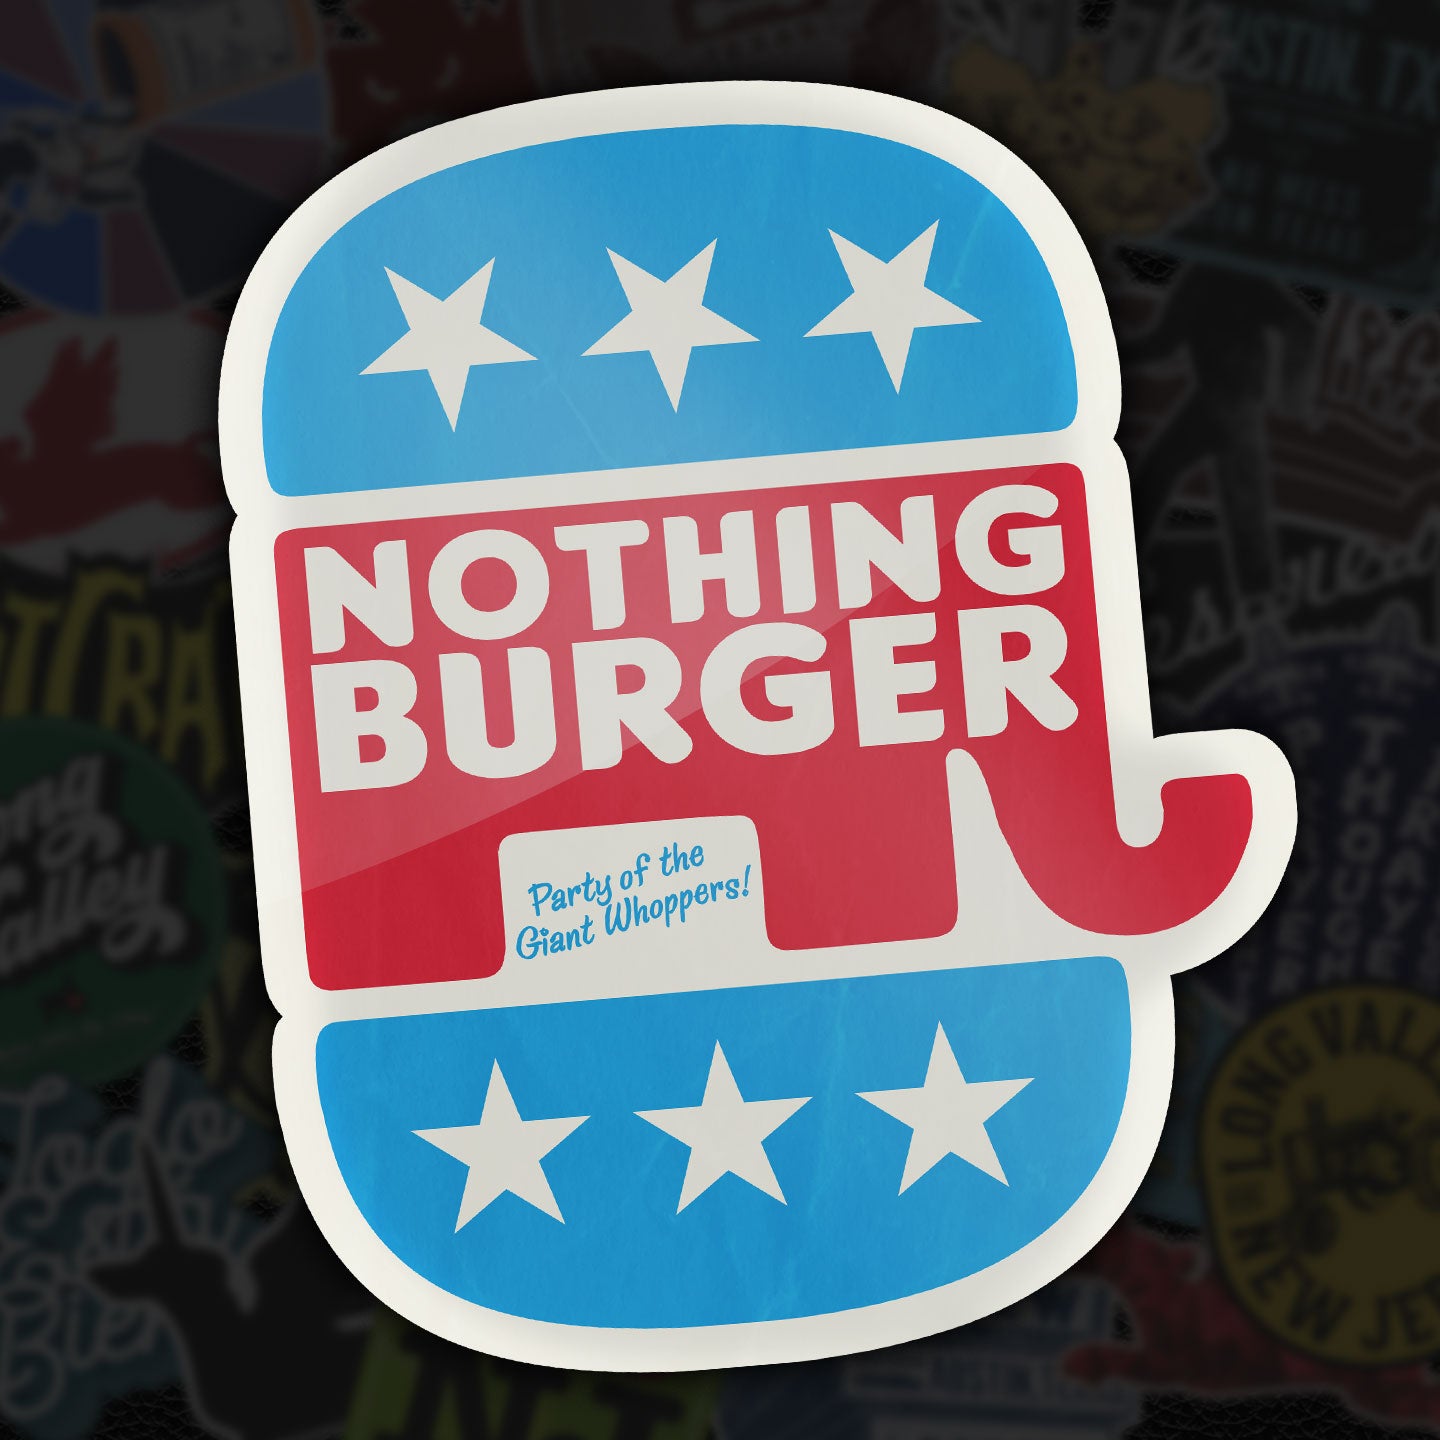 NOTHING BURGER - Giant Whoppers - Sticker